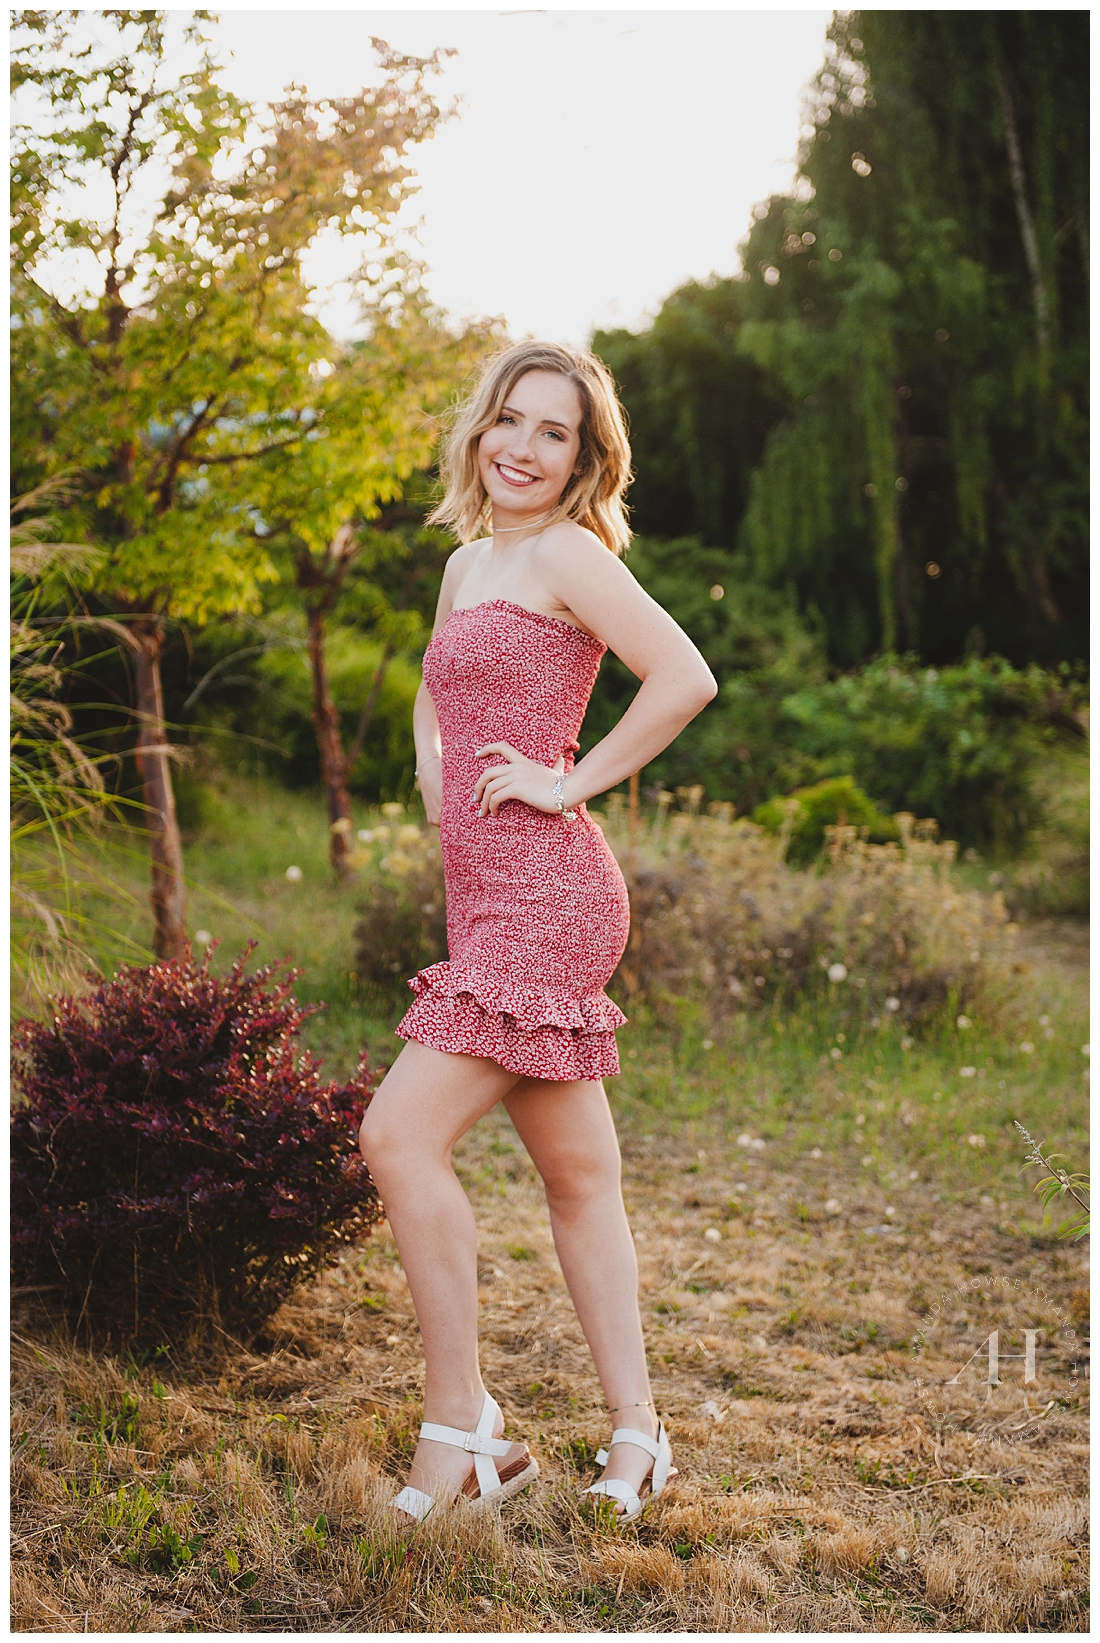 Sunny Senior Portraits in Tacoma in the Summer Photographed by Amanda Howse